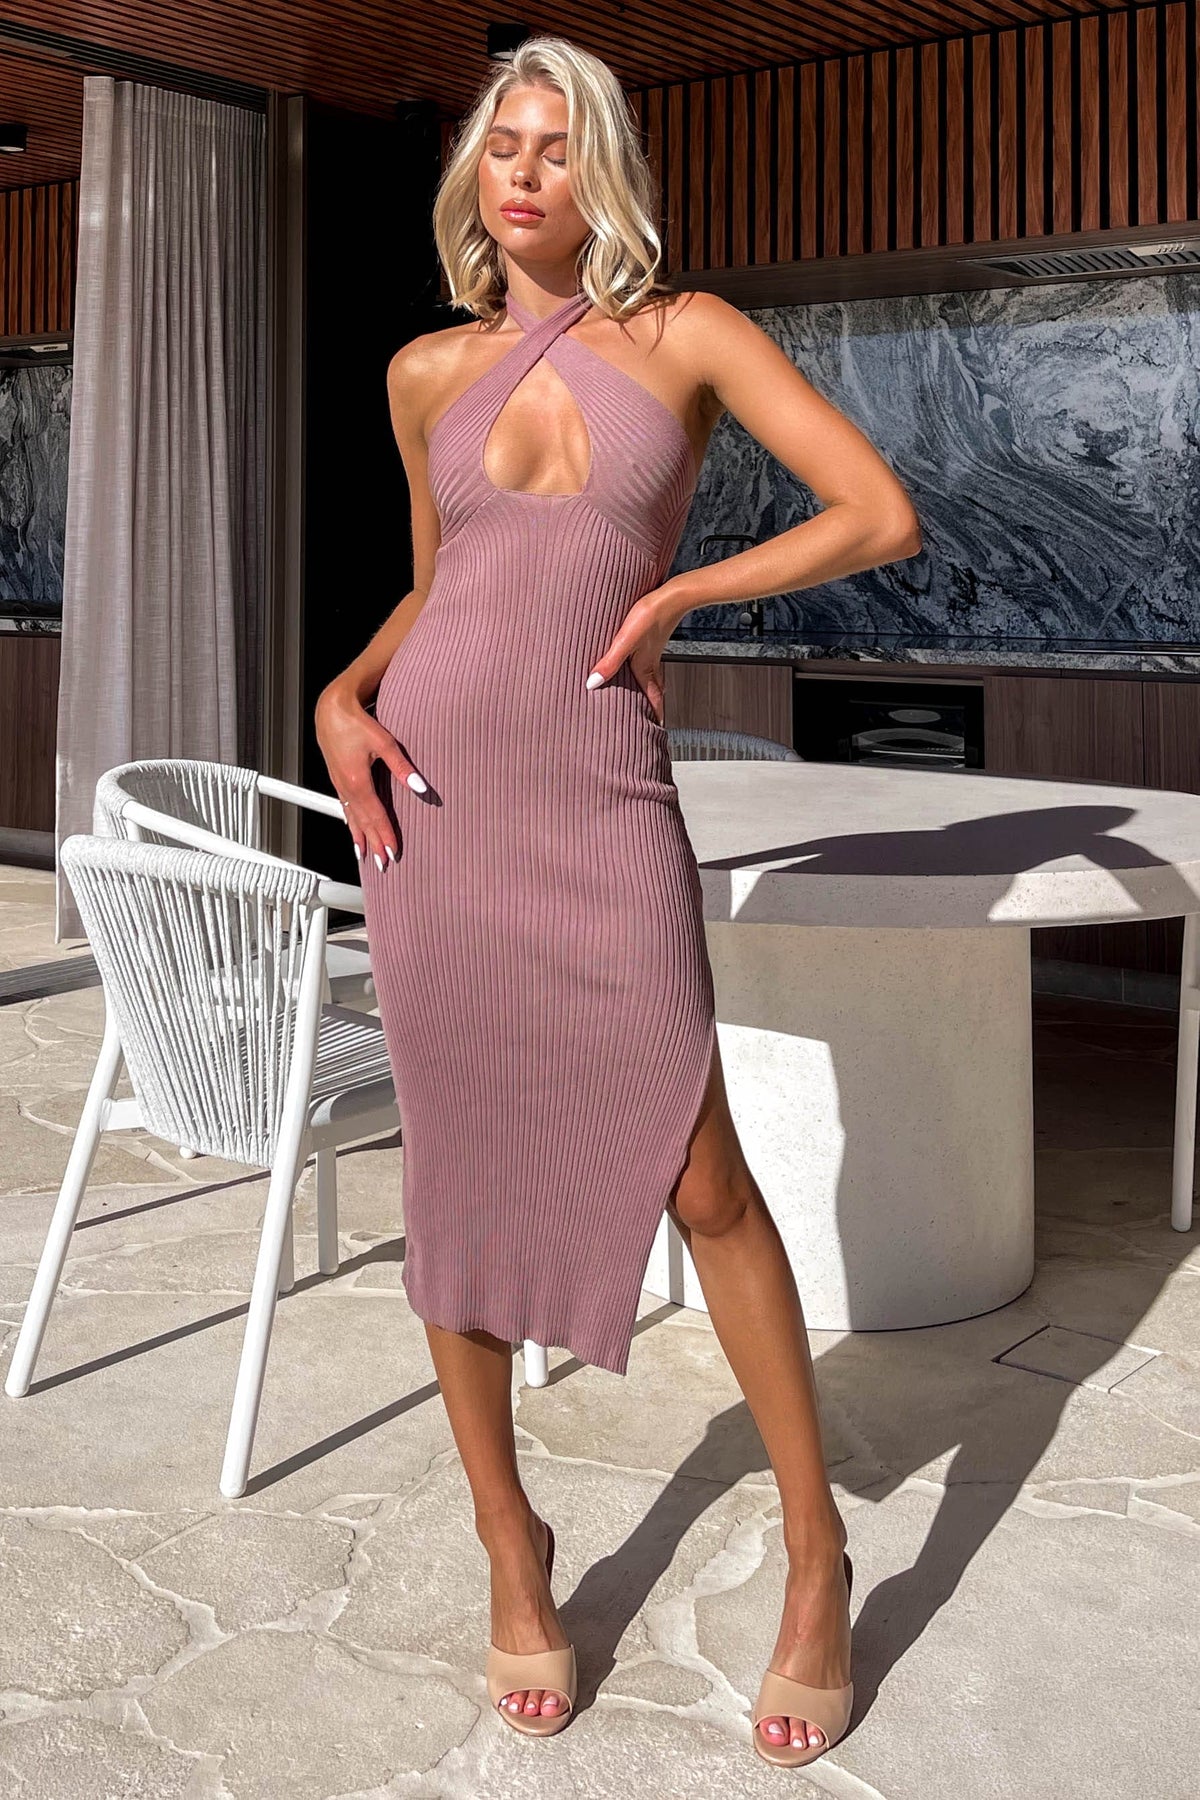 Moscato Dress, BASICS, BEIGE, BODYCON, BROWN, COTTON &amp; POLYESTER, COTTON AND POLYESTER, DRESS, DRESSES, HALTER, HALTER DRESS, MIDI DRESS, NEW ARRIVALS, POLYESTER AND COTTON, RIBBED, SIDE SPLIT, TWIST, , Shop The Latest Women&#39;s Dresses - Our New Moscato Dress is only $68.00, @ MISHKAH ONLINE FASHION BOUTIQUE-MISHKAH